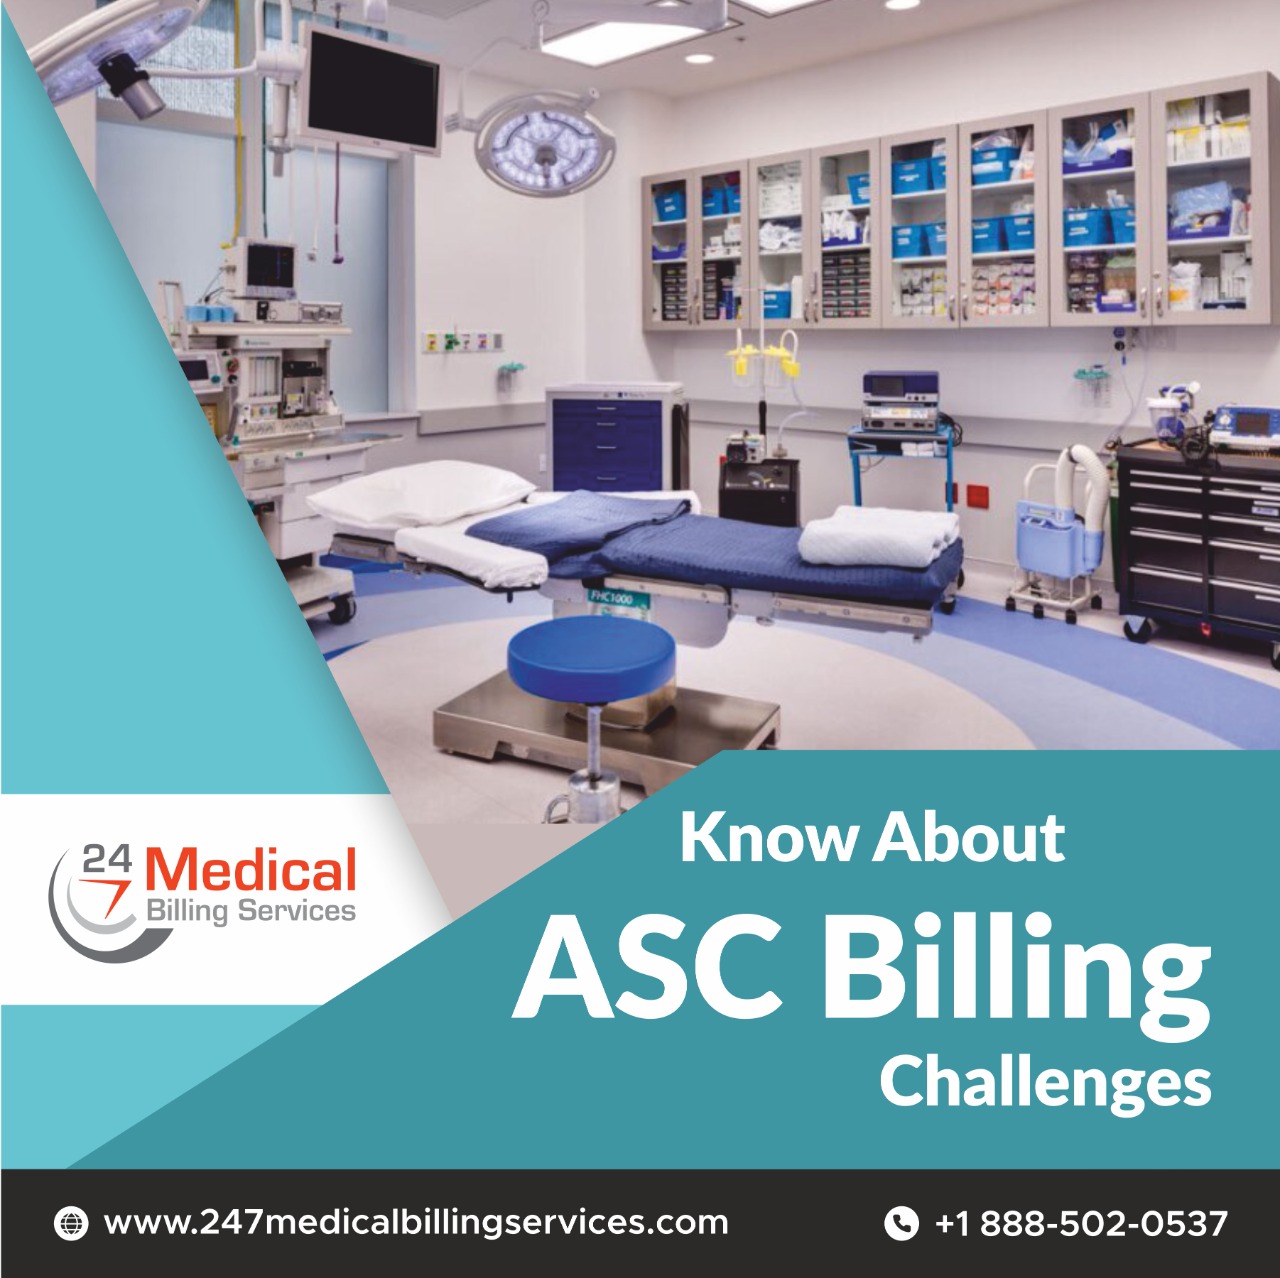  Know about ASC Billing Challenges